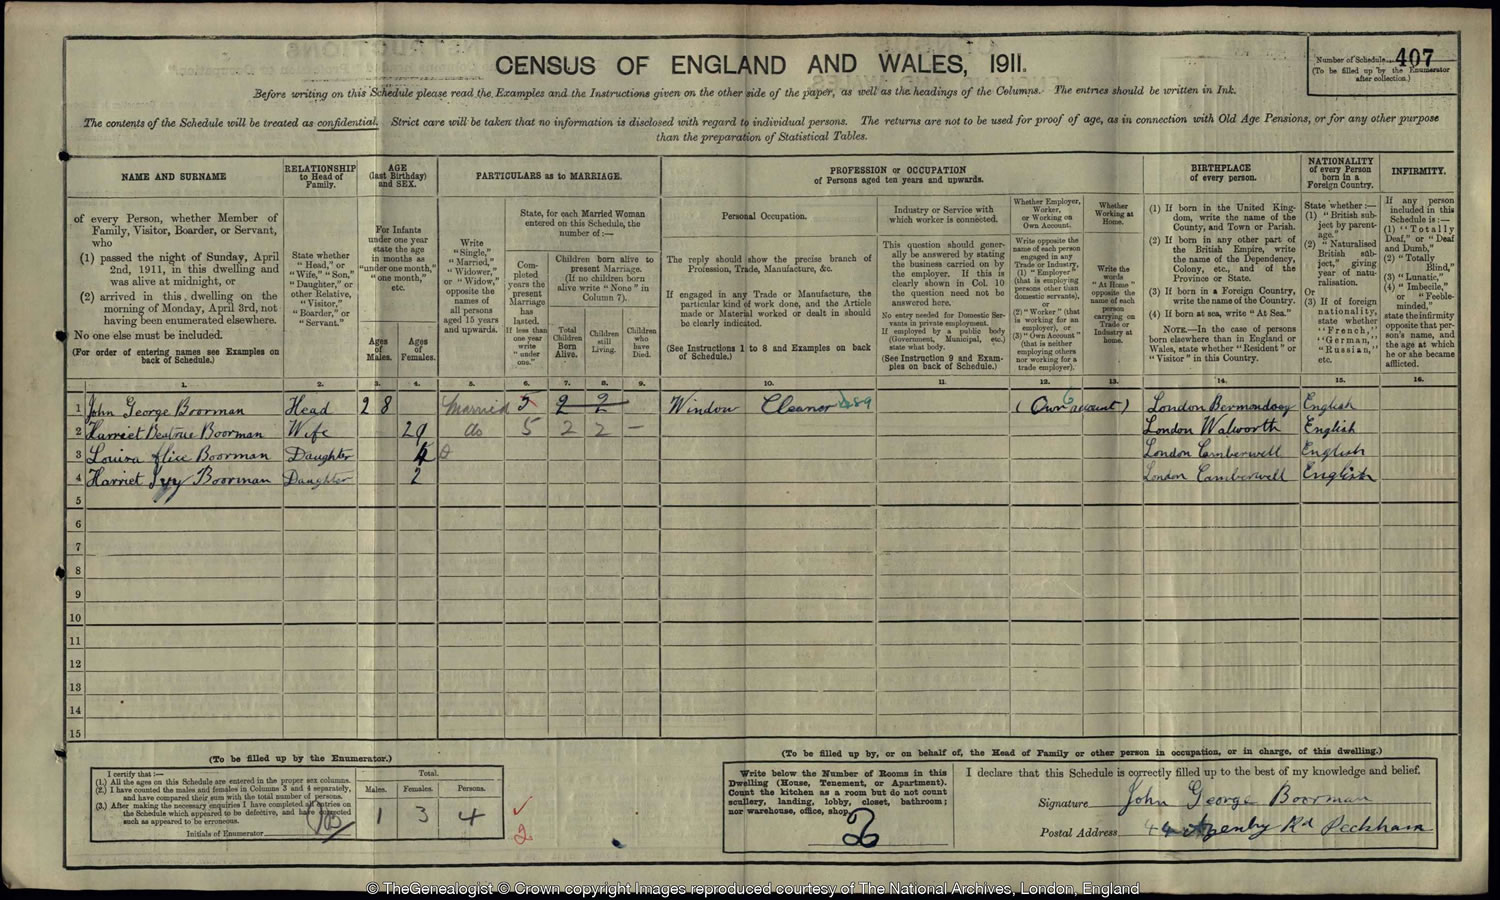 1911 census on TheGenealogist shows that John Boorman was a window cleaner at the time